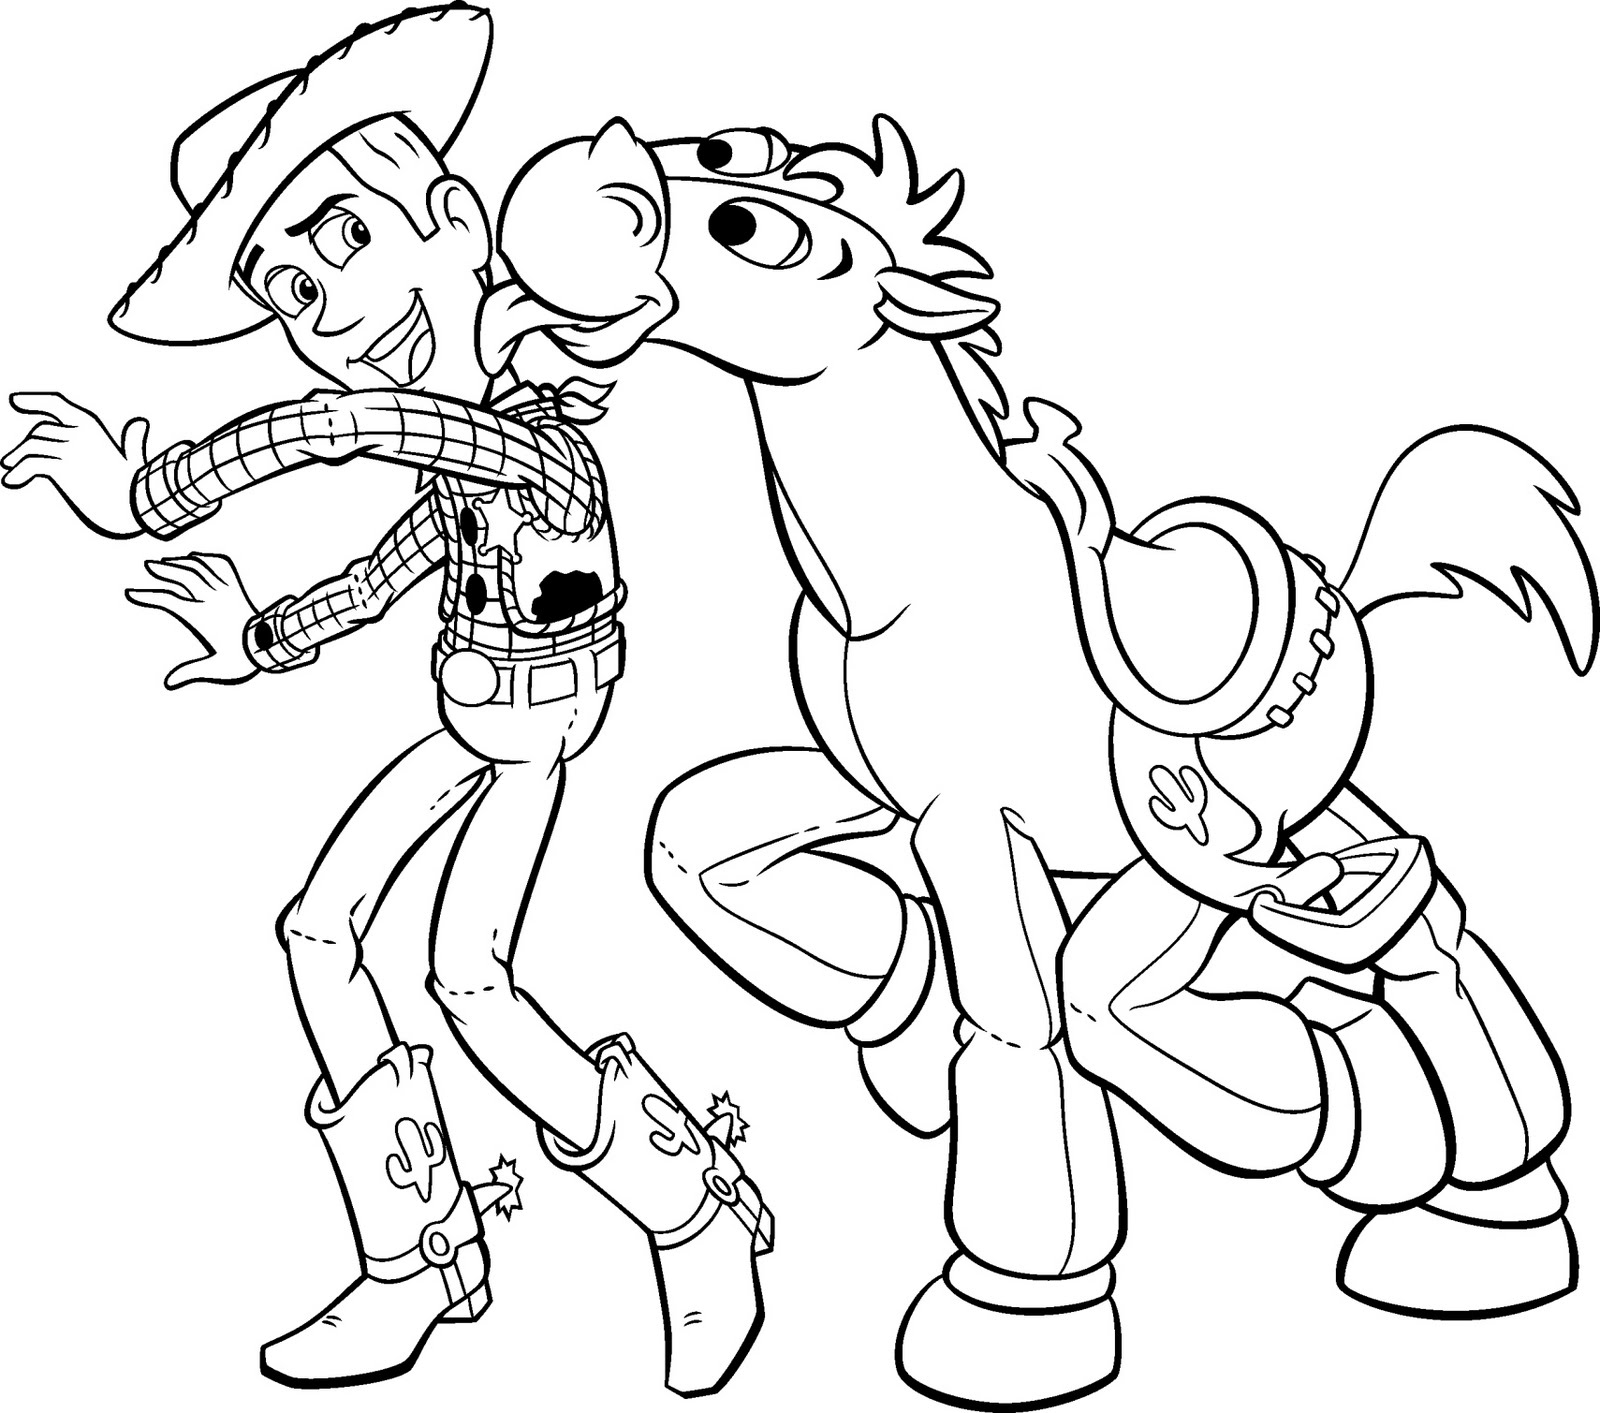 Download Woody and Bullseye - Toy Story Kids Coloring Pages